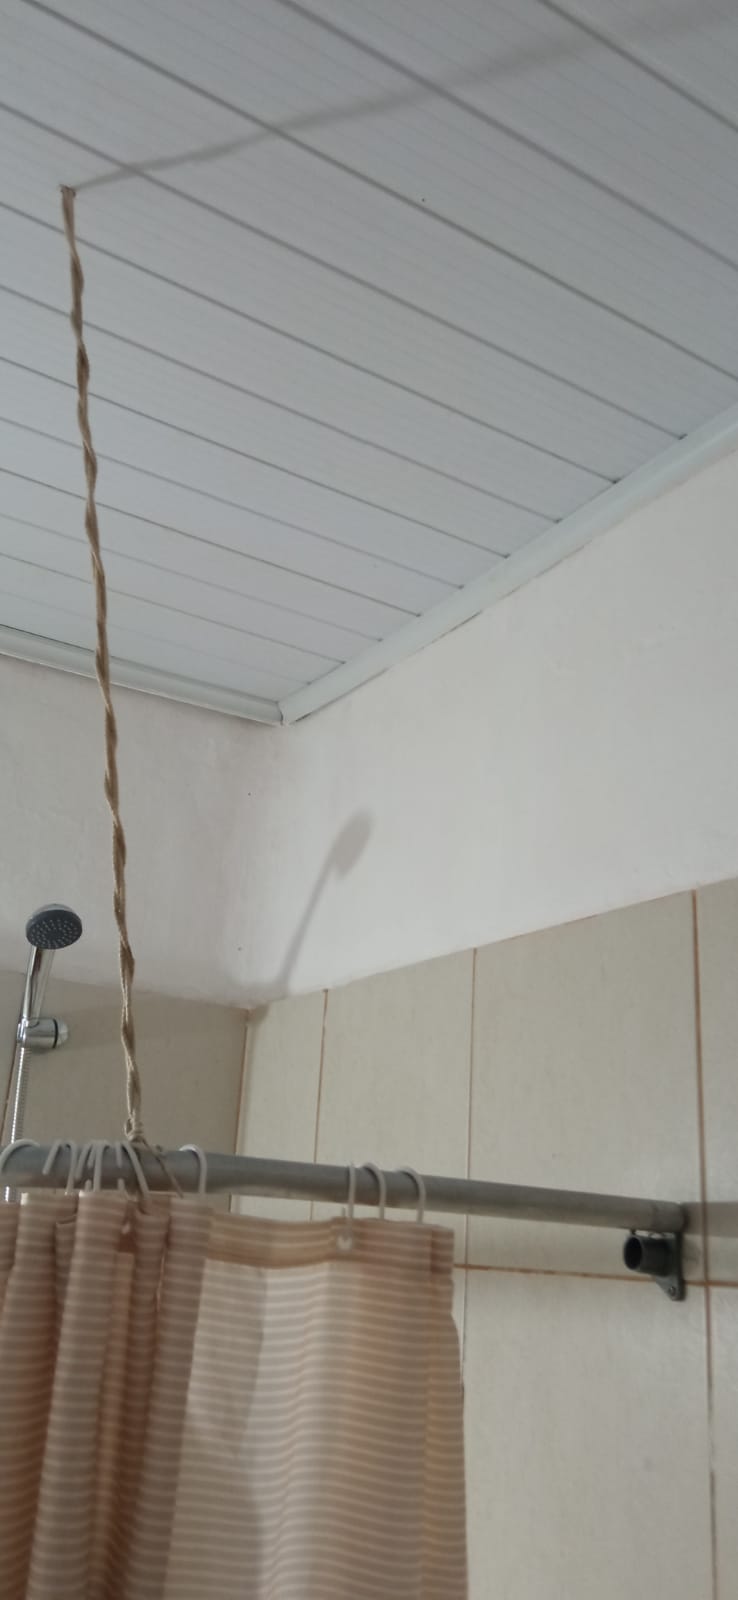 infuriating landlords - ceiling - Mal